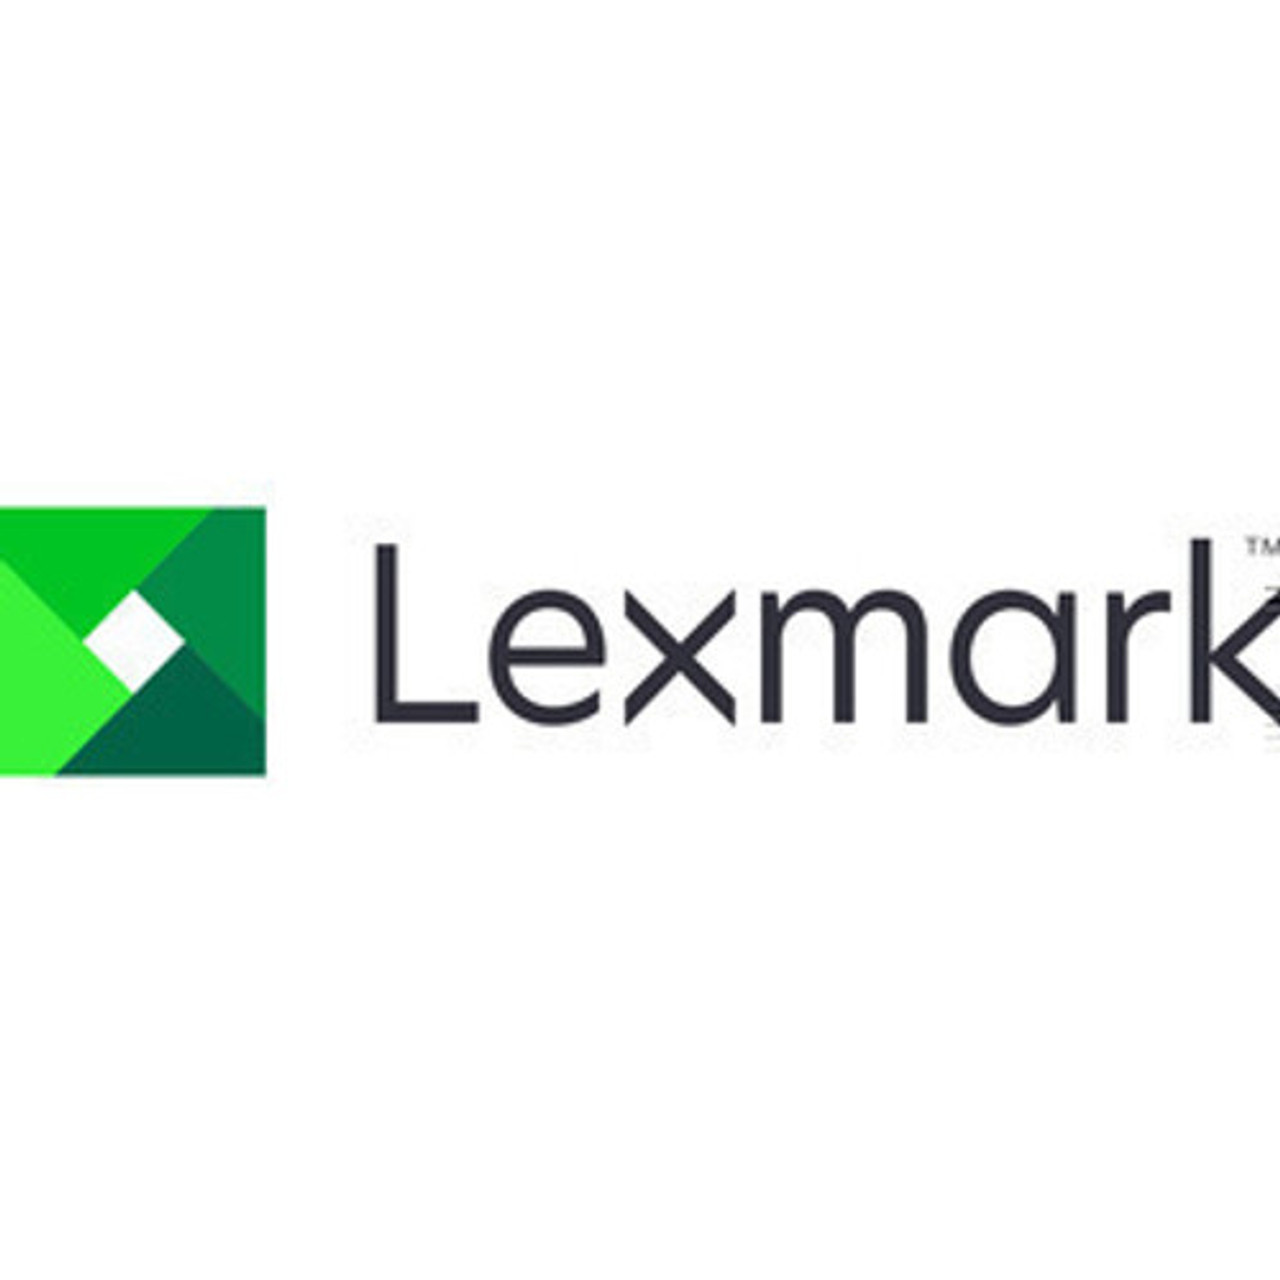 Lexmark 3 Year Parts Only - MS331 - 2371740